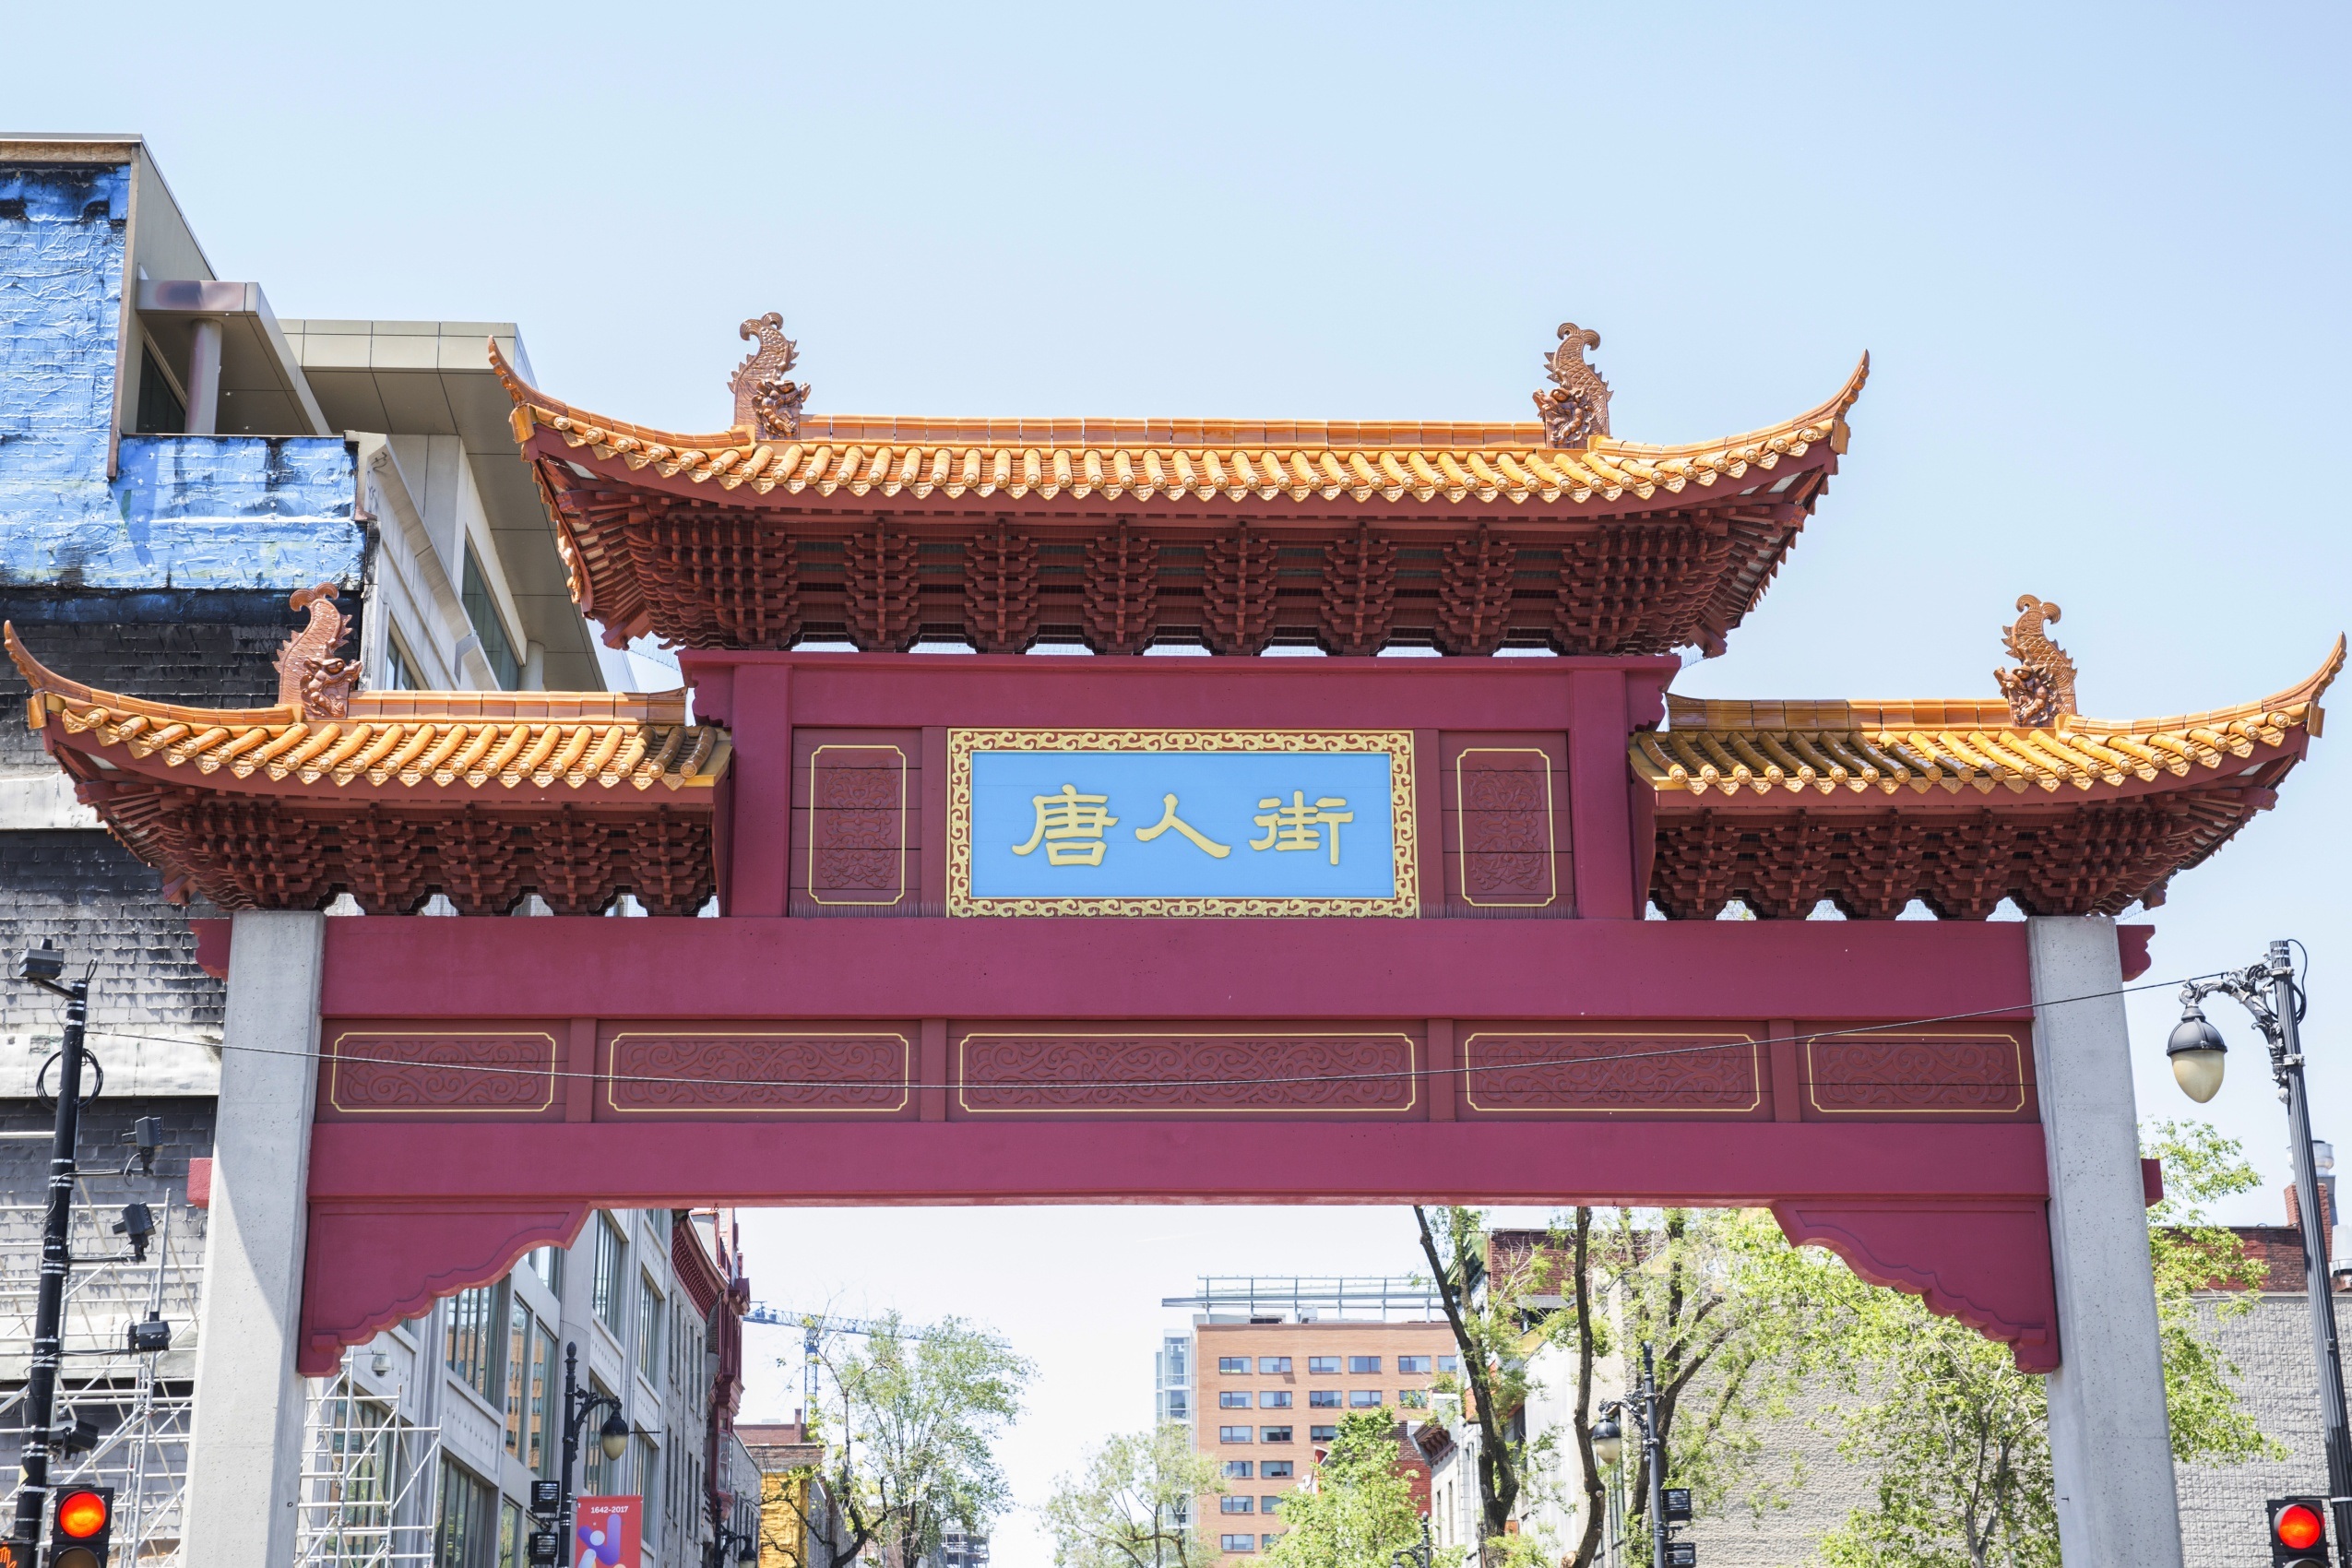 Montreal's Chinatown becomes the first area ever to be designated a historic site